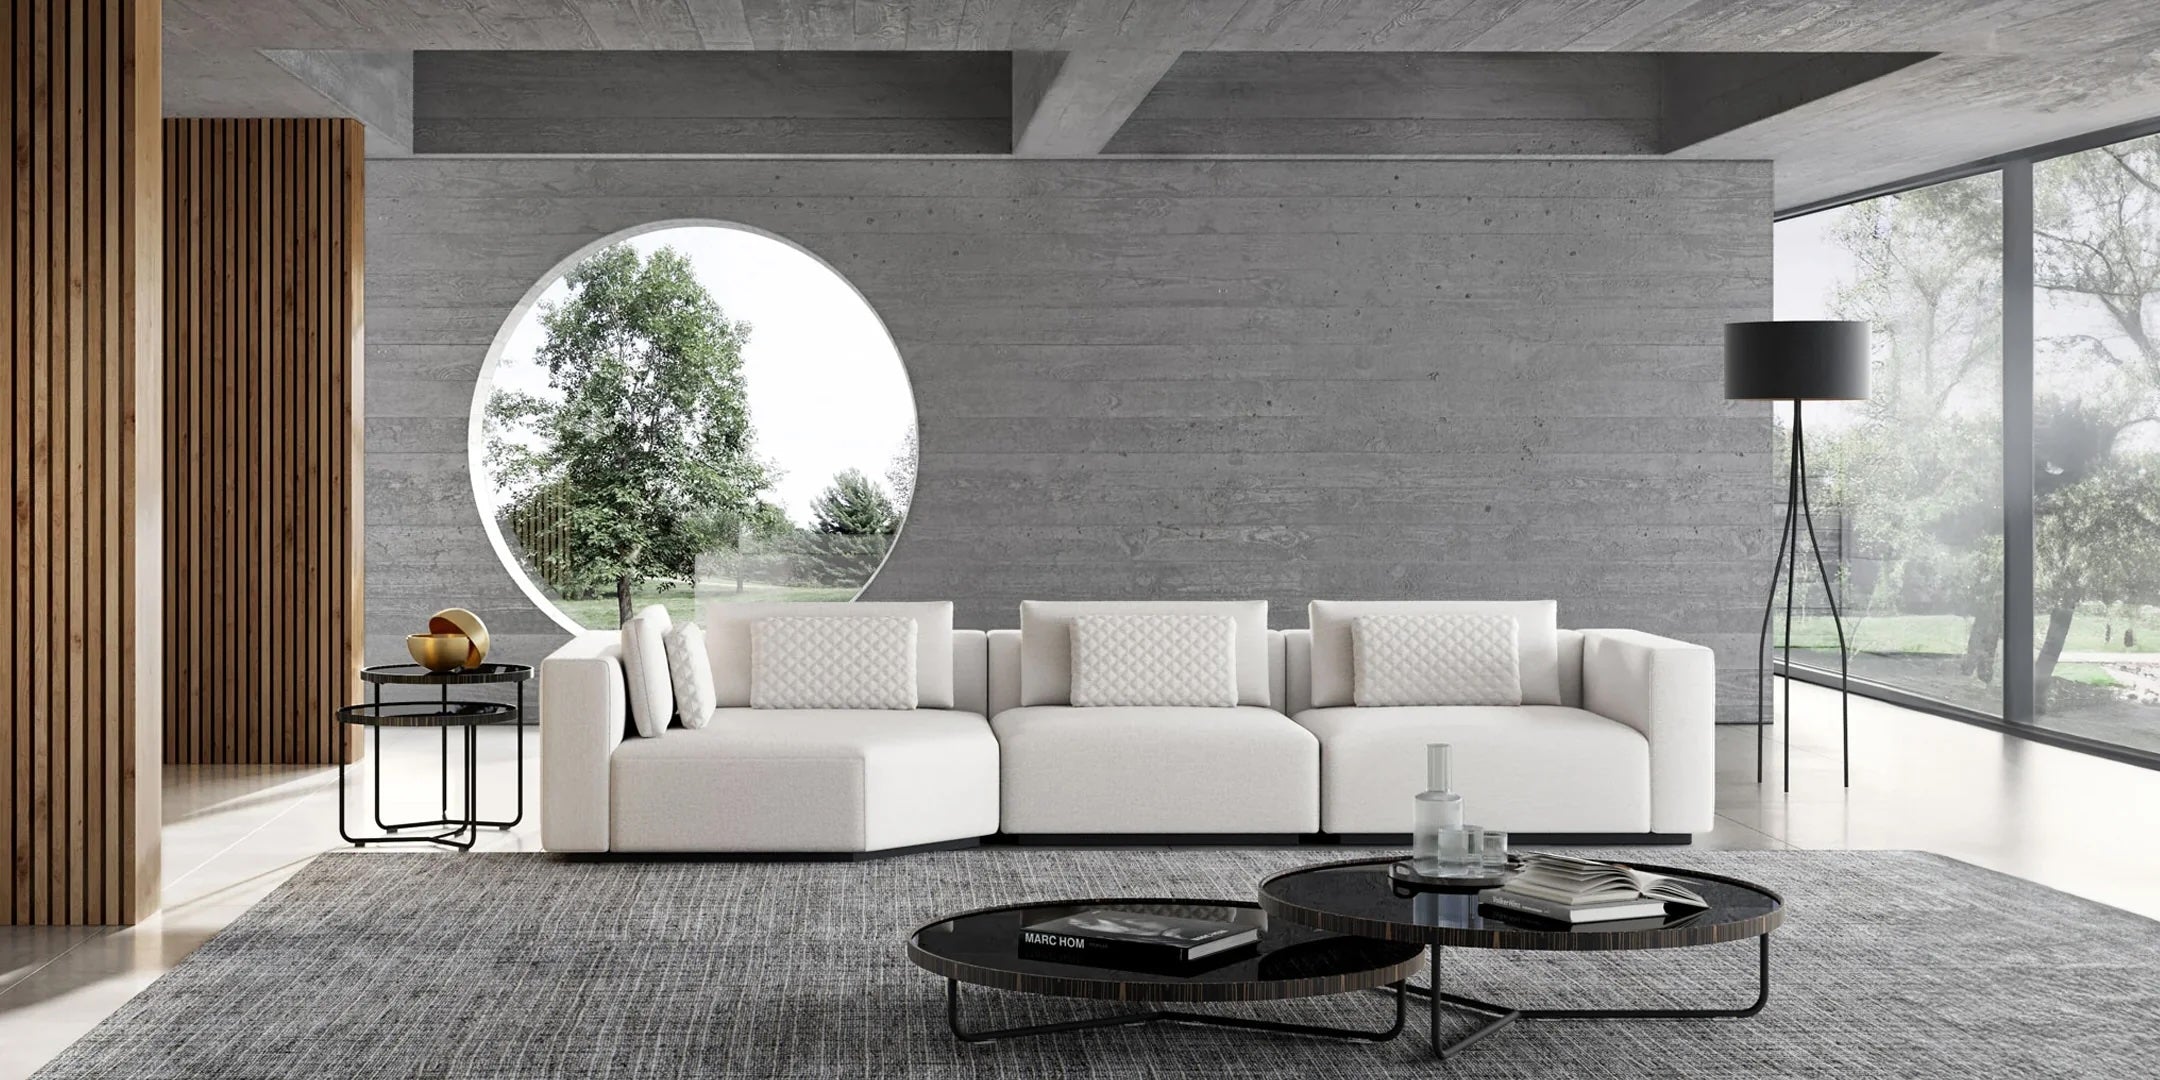 A modern living room with a minimalist design features a large white sectional sofa and a pair of round black coffee tables on a gray rug. A round window, floor lamp, and a side table with decorative items enhance the room's contemporary decor.